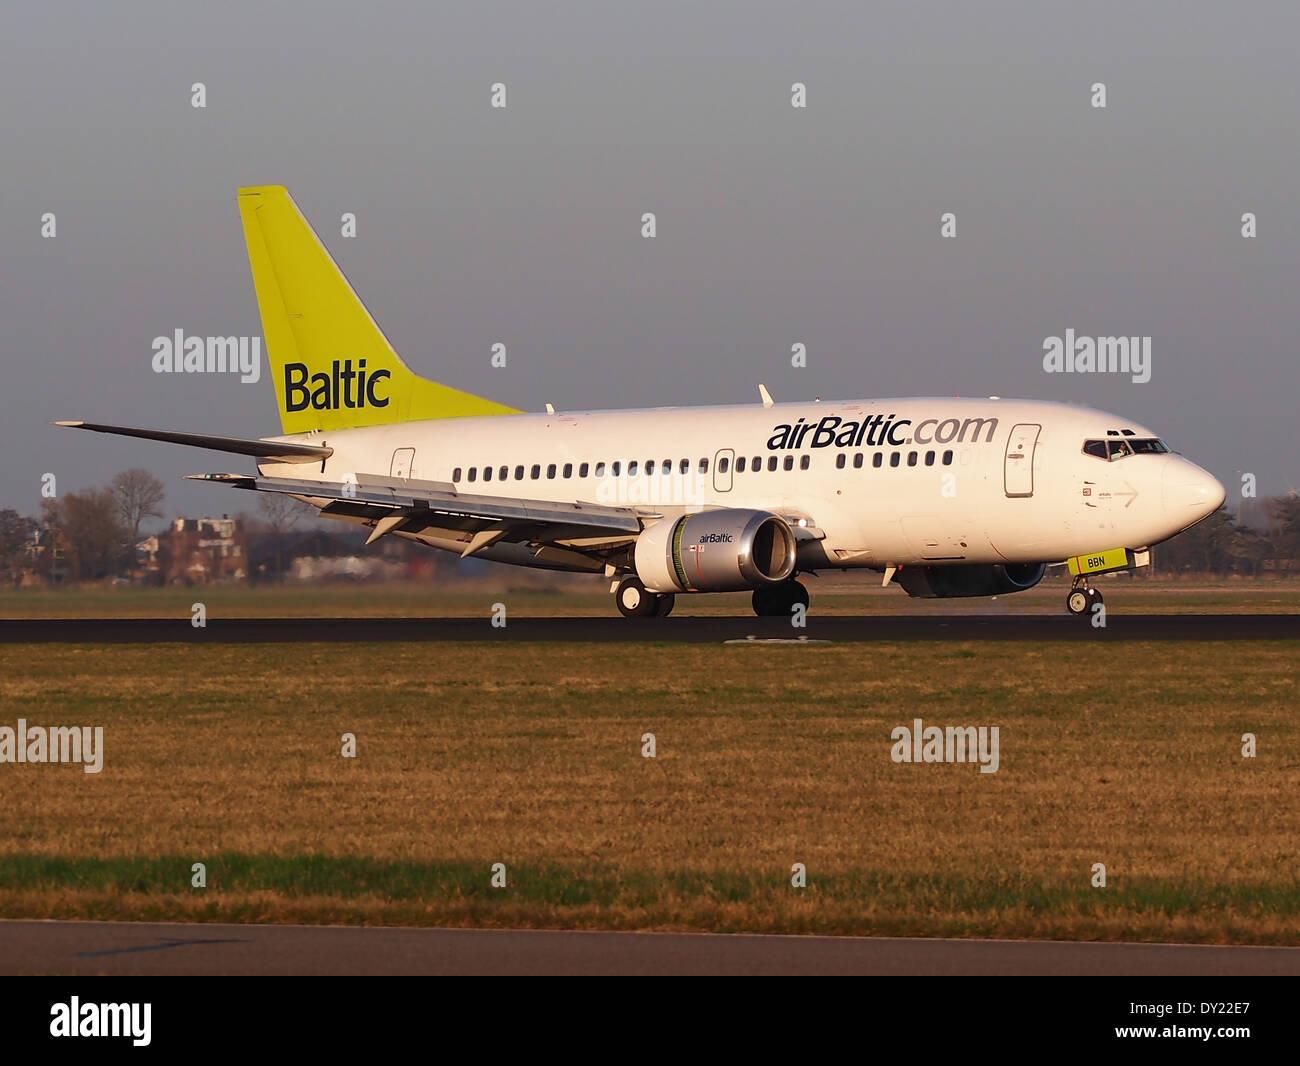 YL-BBN Air Baltic Boeing 737-522 - cn 26683, landing at AMS Amsterdam (Schiphol), pic3 Stock Photo